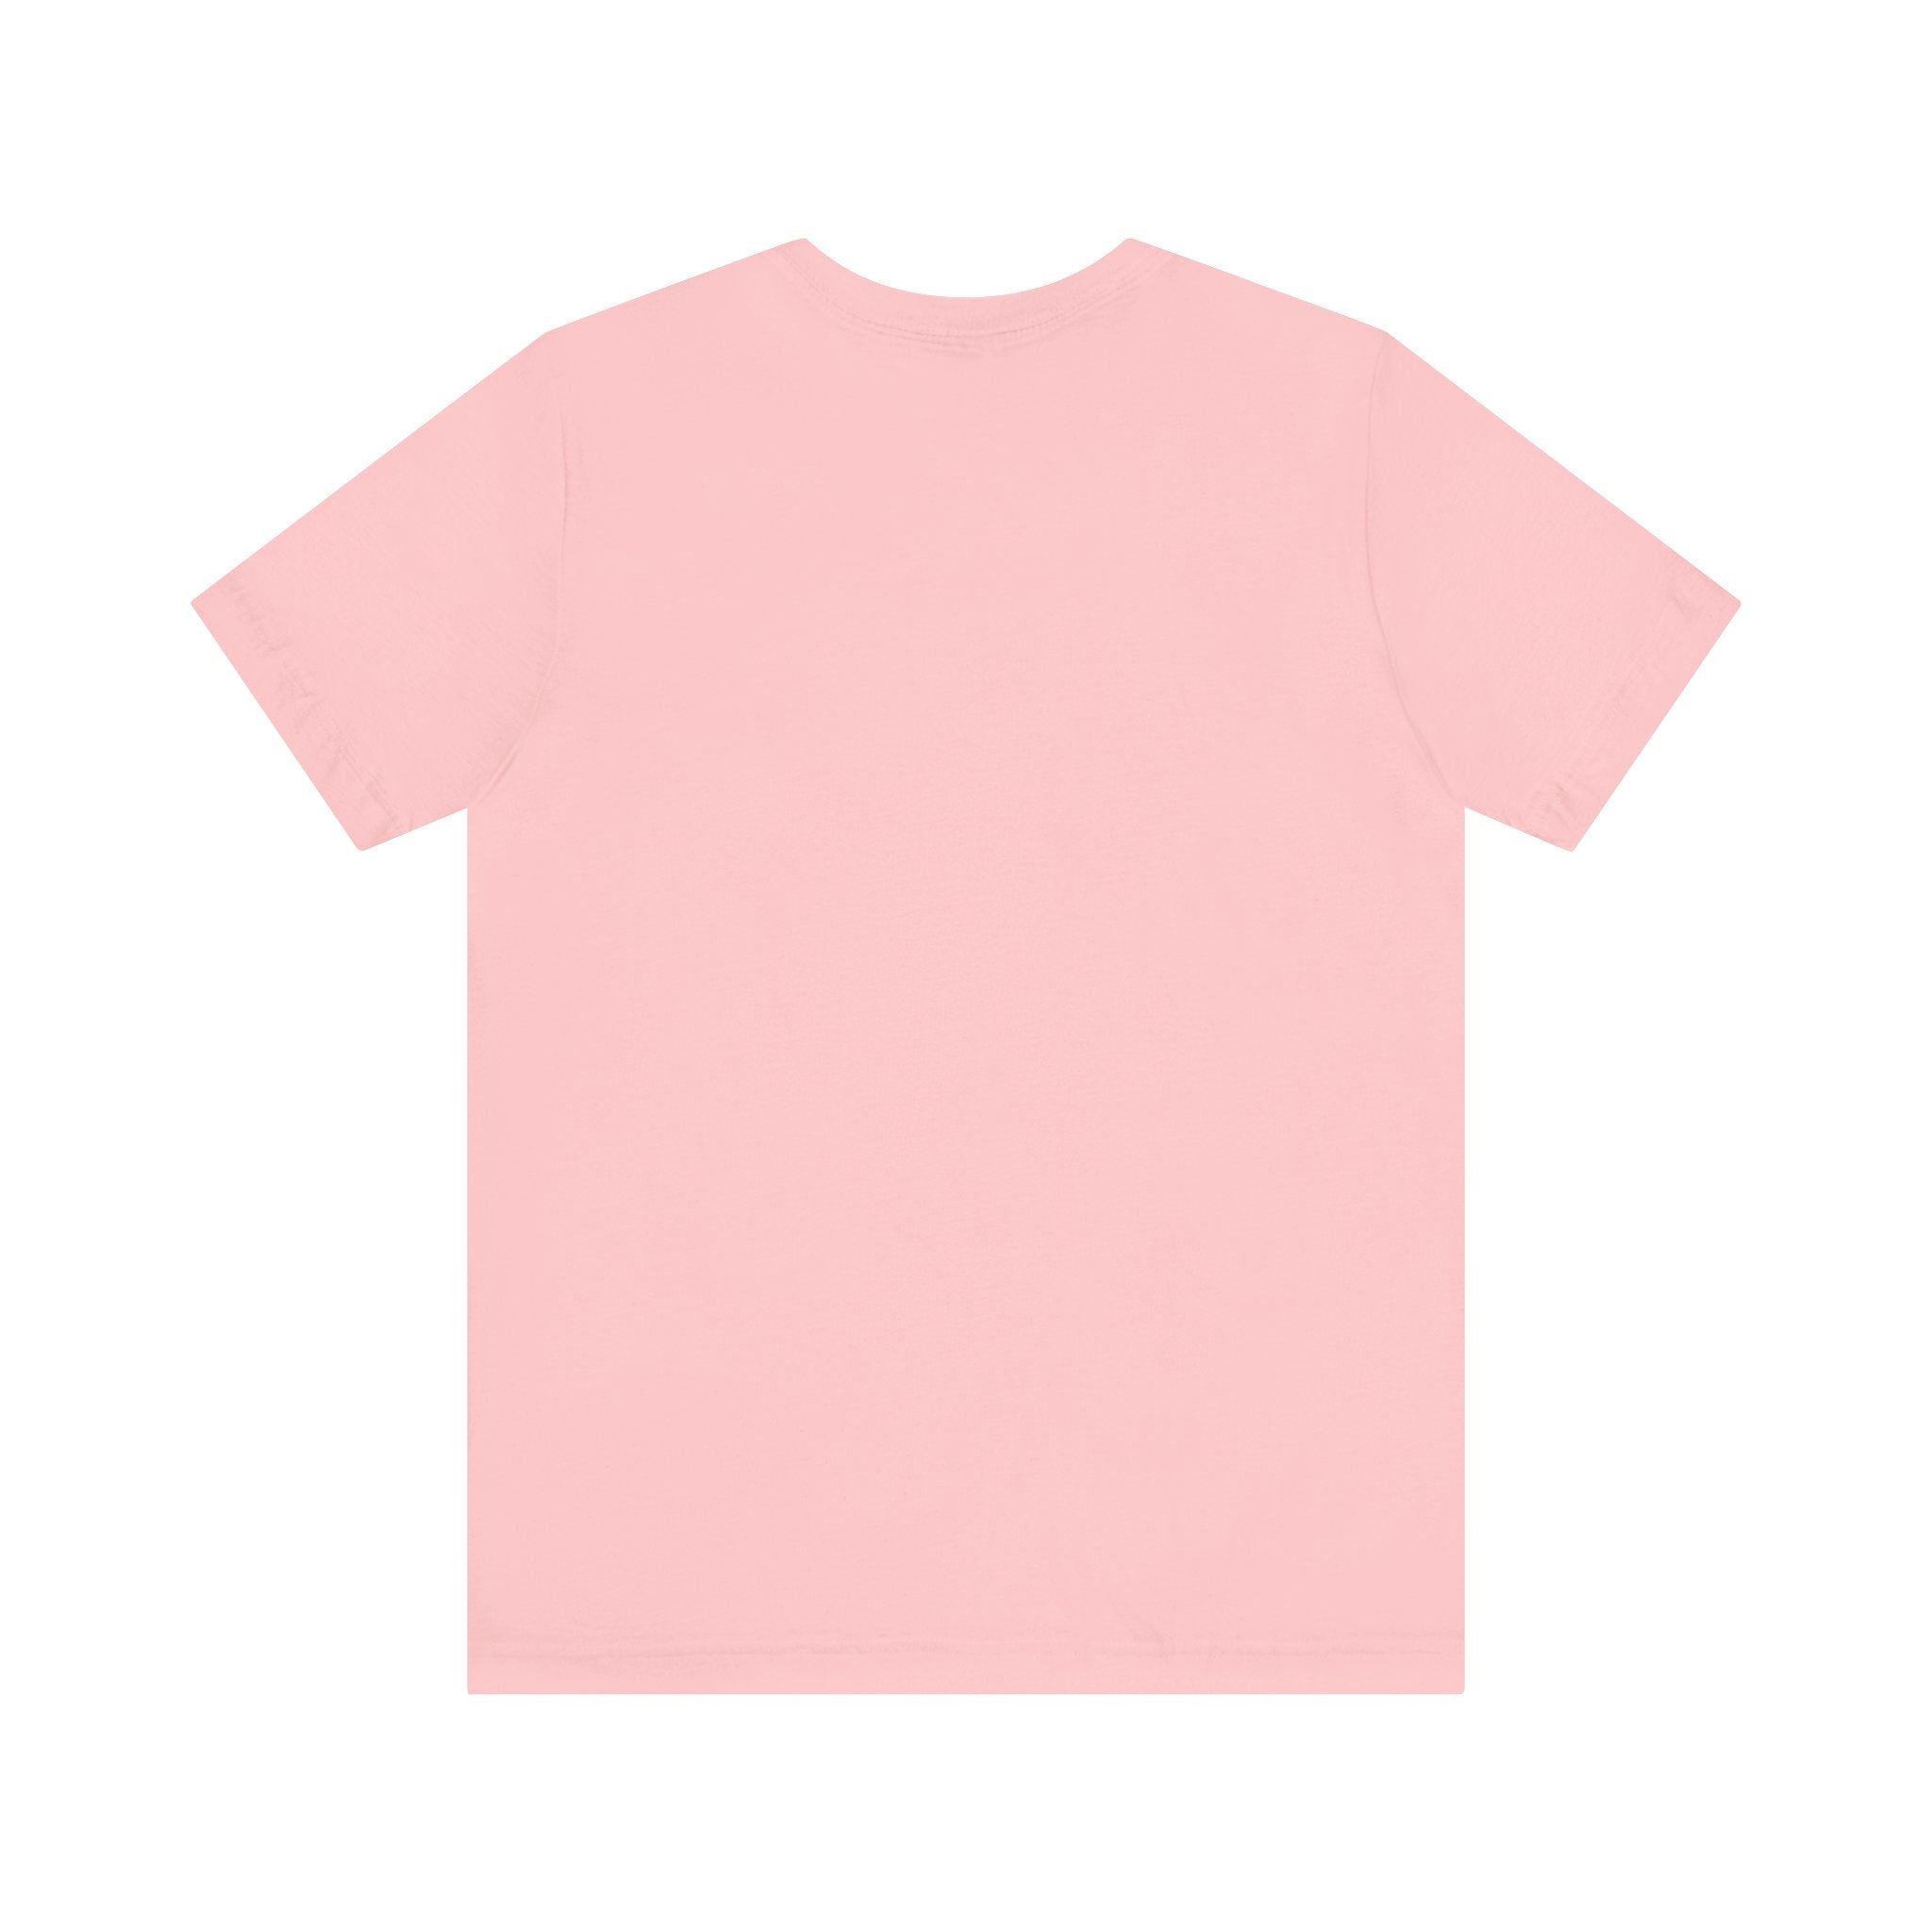 Catch the Waves Surfing T-Shirt with pink shirt and white logo on front - direct-to-garment printed item